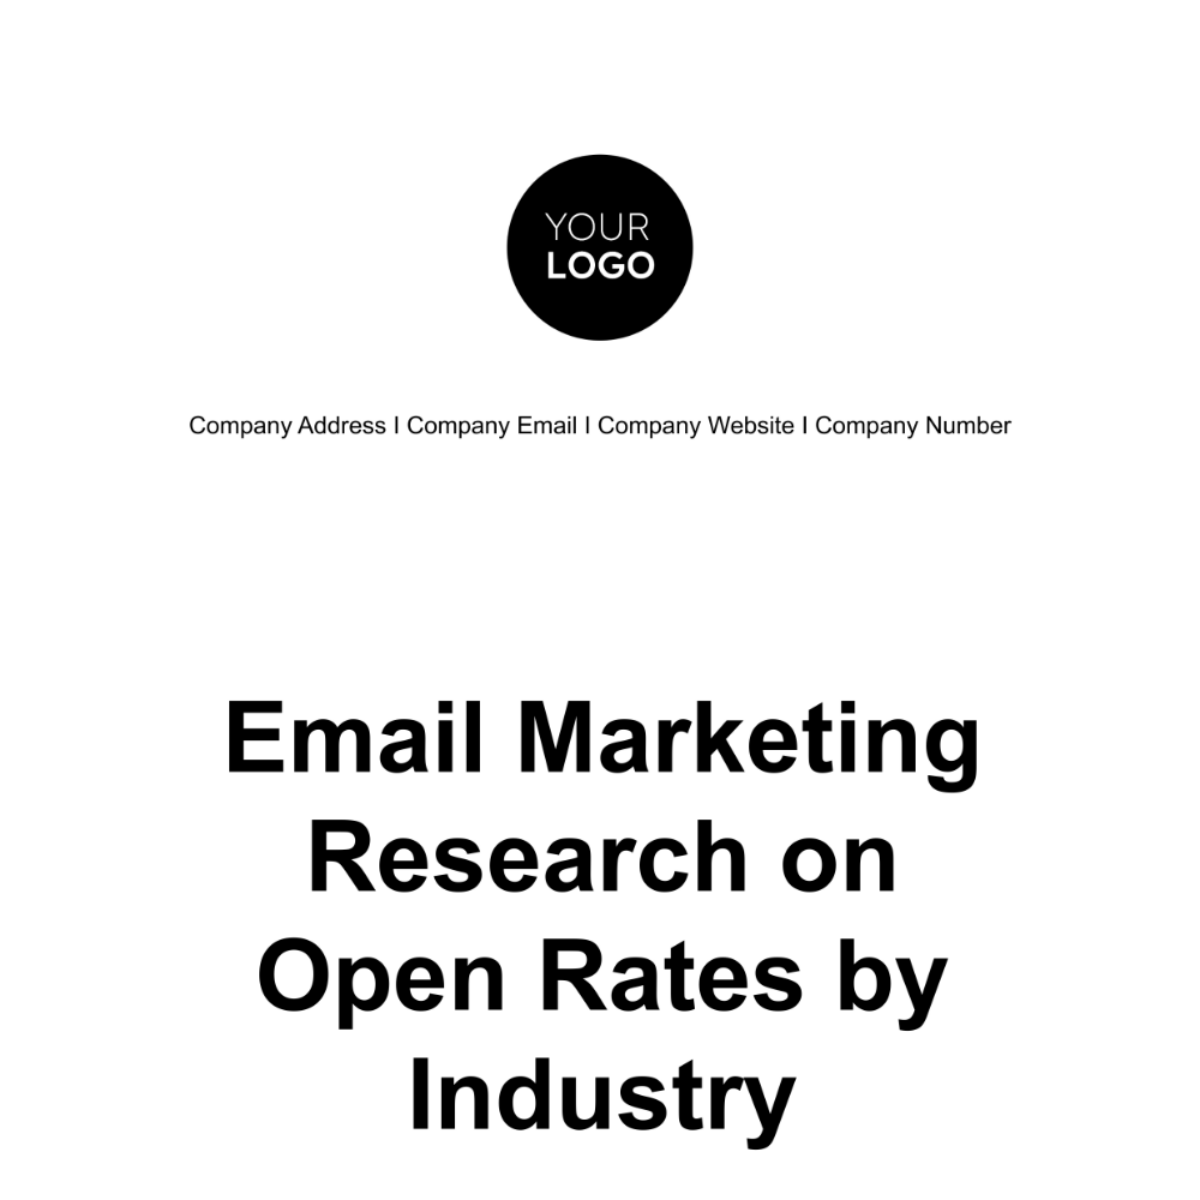 Email Marketing Research on Open Rates by Industry Template